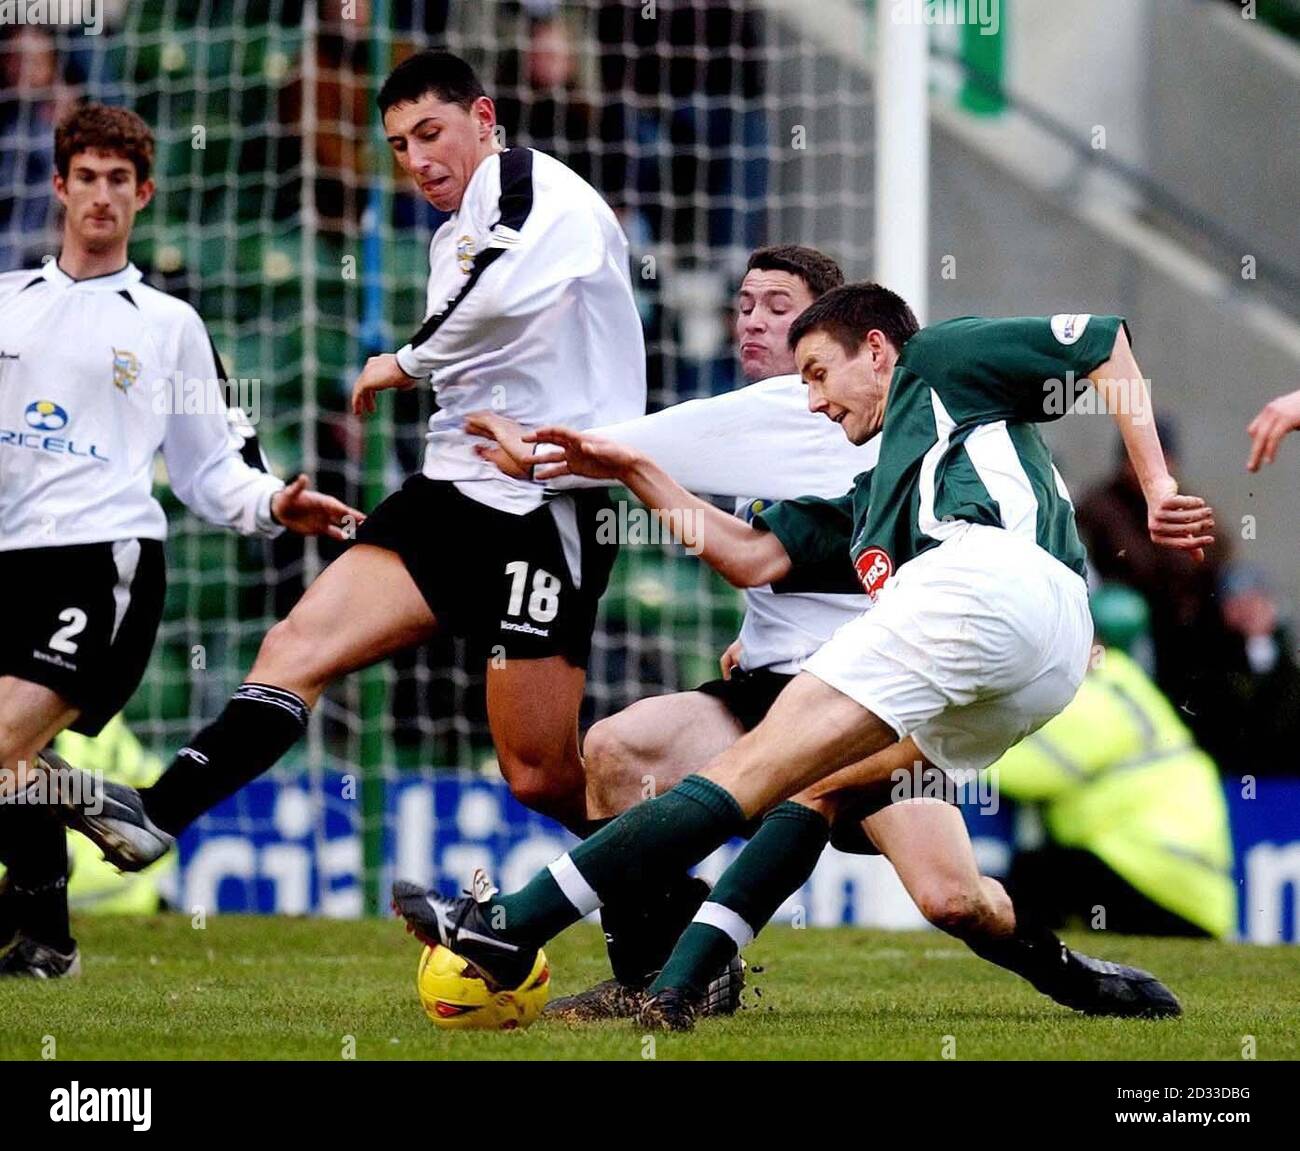 Plymouth Argyle's Ian Stonebridge (right) scores the winning goal against Port Vale during their Nationwide Division Two match at Plymouth's Home Park ground. Stock Photo